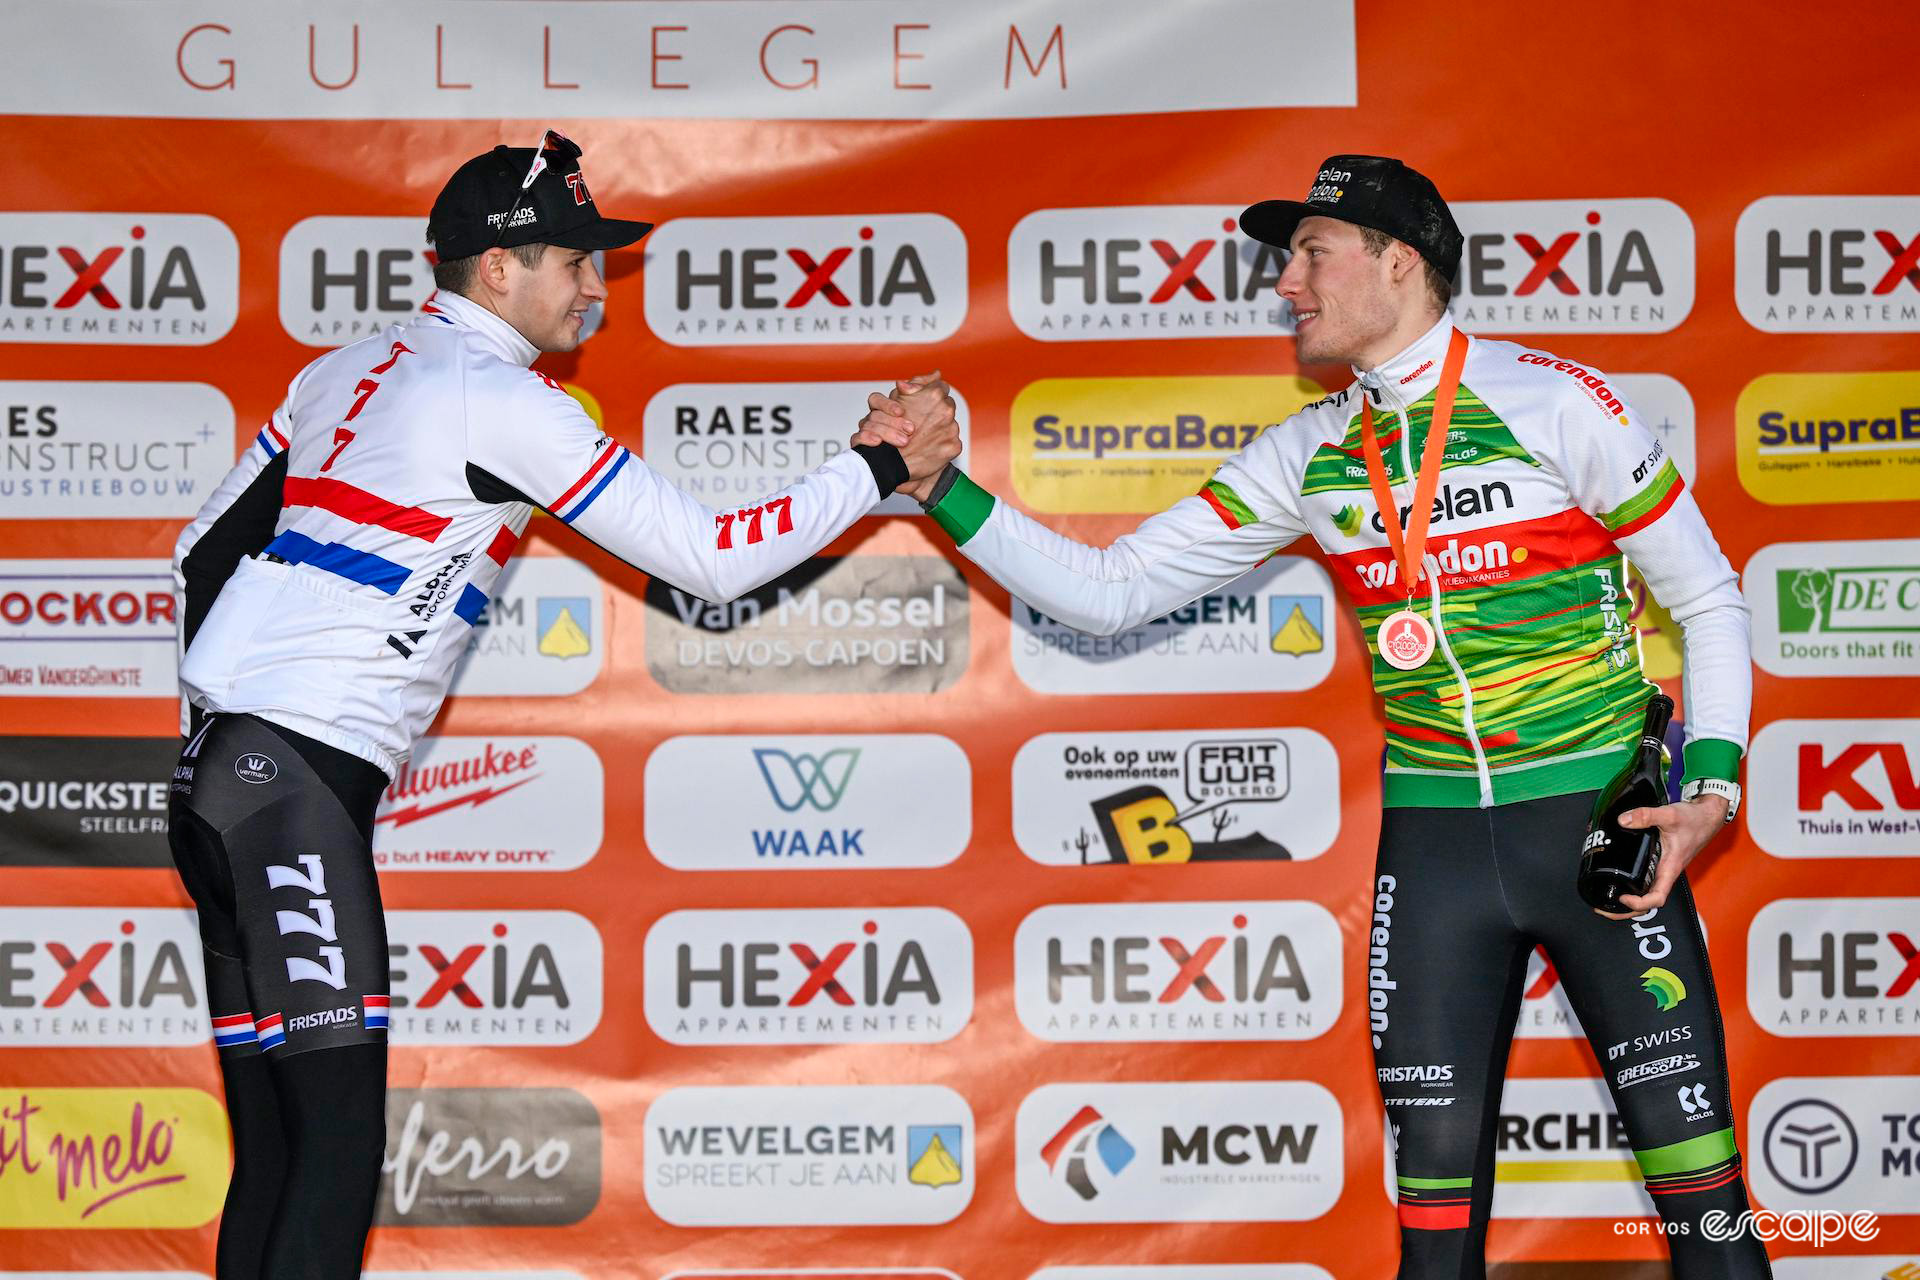 Cameron Mason and Joran Wyseure clasp hands in mutual congratulation on the podium after Hexia Cyclocross Gullegem.